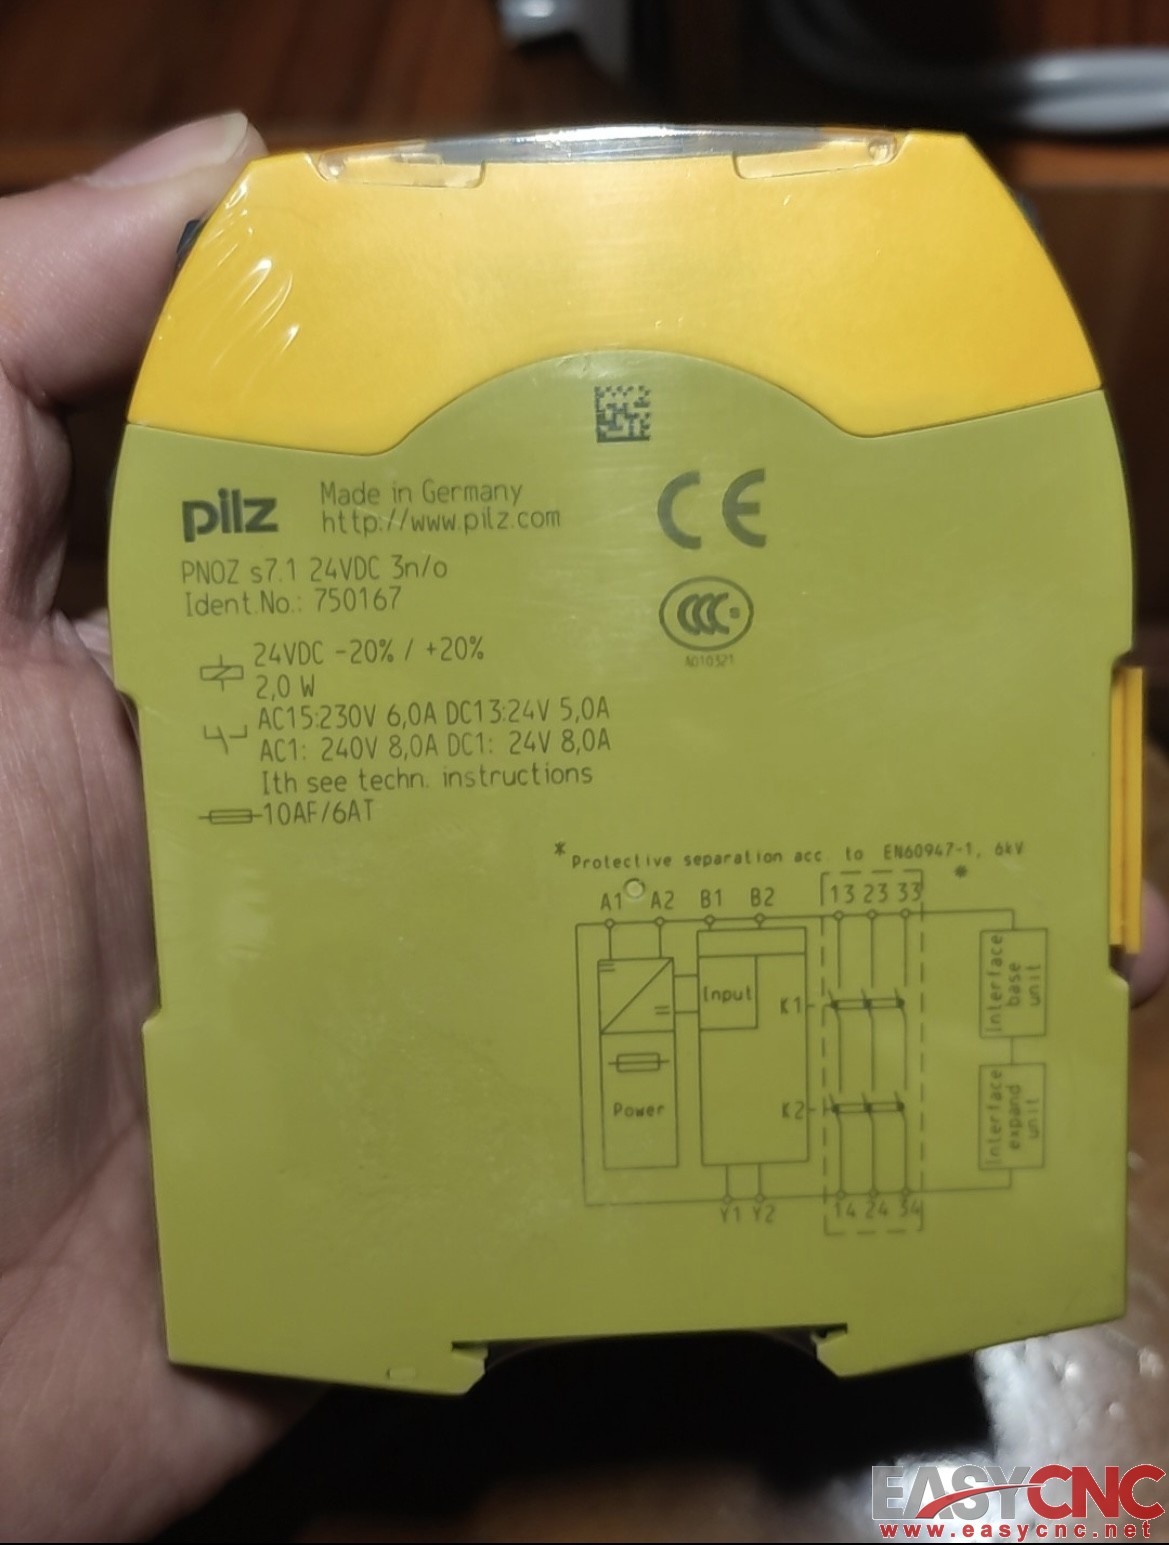 750167 PNOZ s7.1 Pilz Safety Relay New And Original